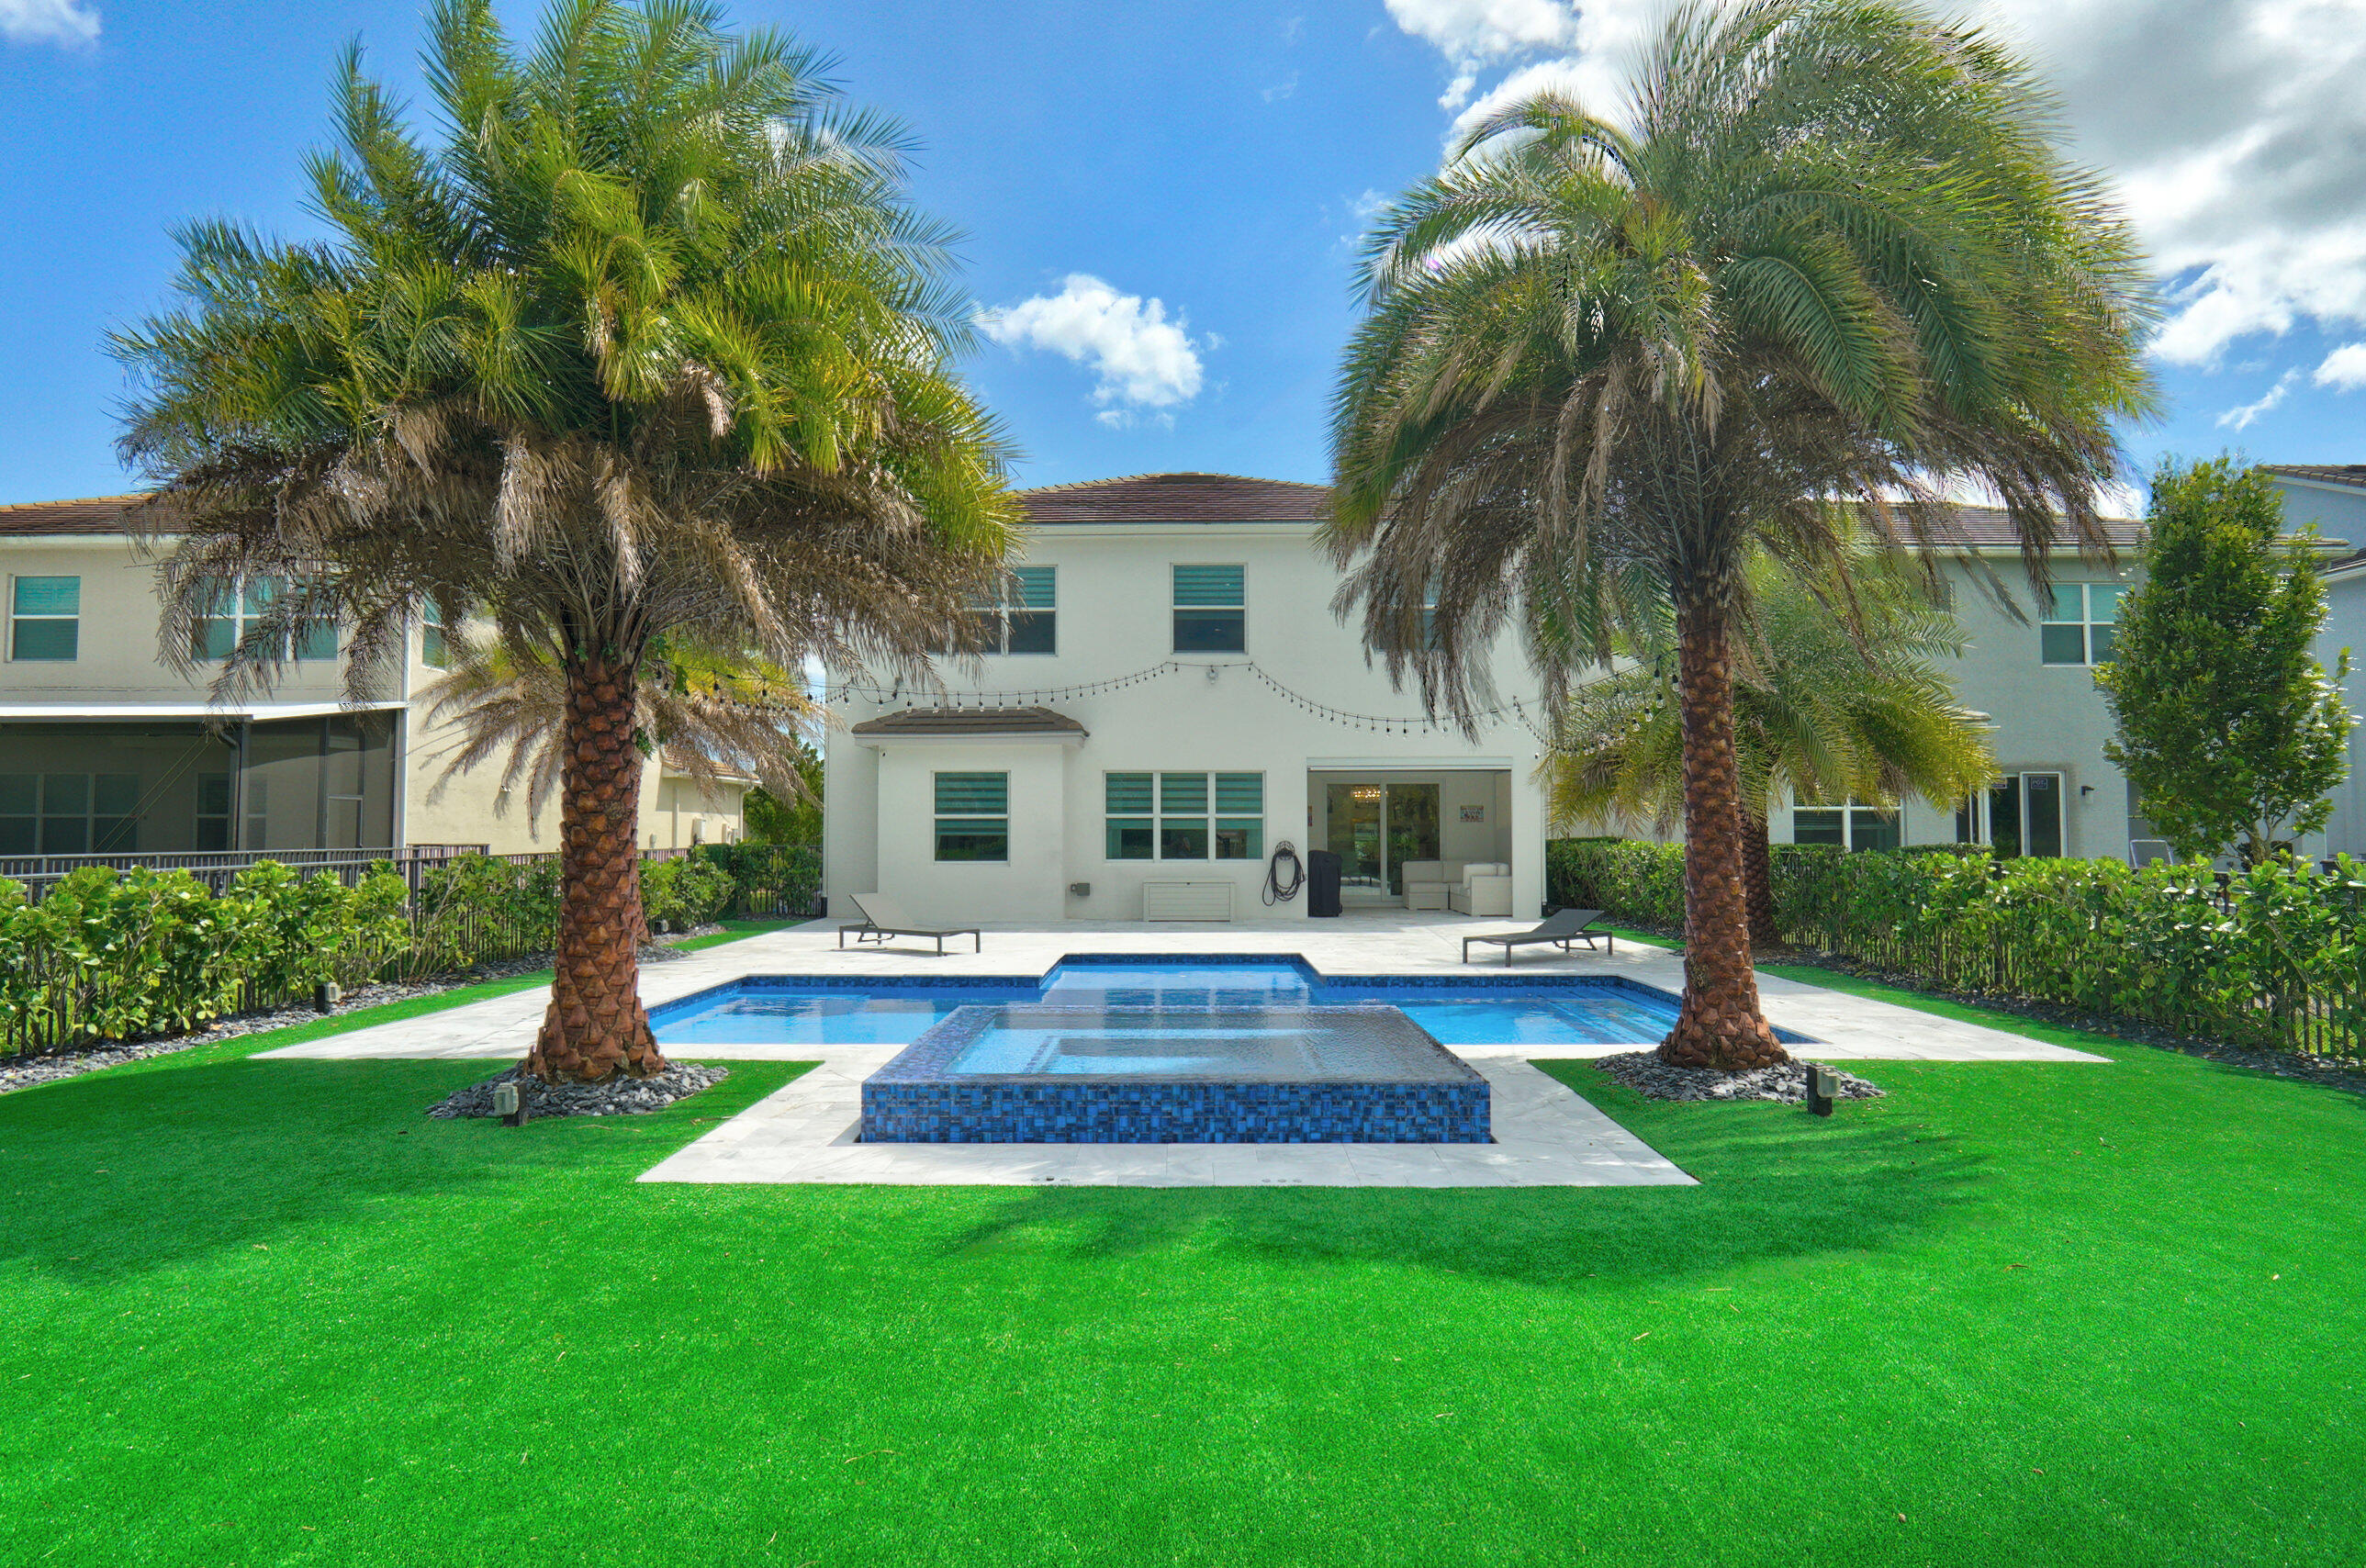 15388 Goldfinch Circle, Westlake, Palm Beach County, Florida - 4 Bedrooms  
3.5 Bathrooms - 